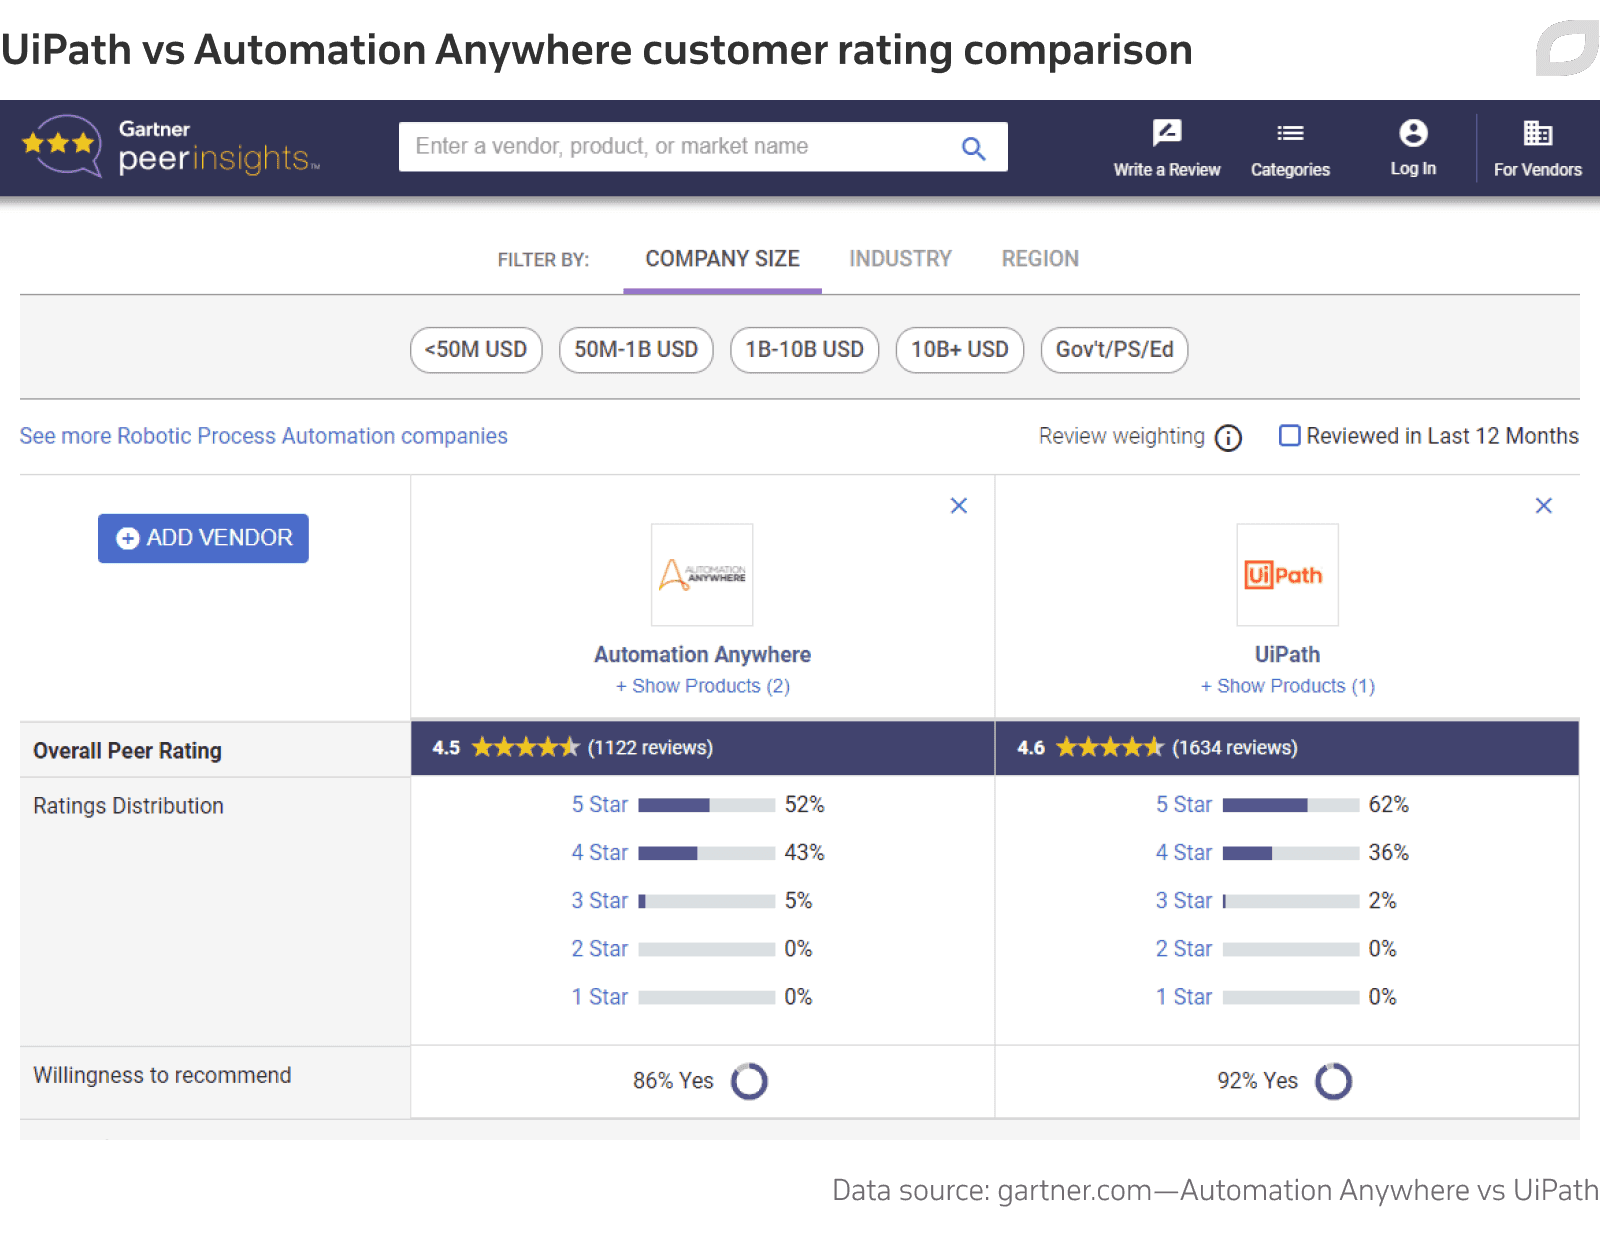 UiPath vs Automation Anywhere customer rating comparison